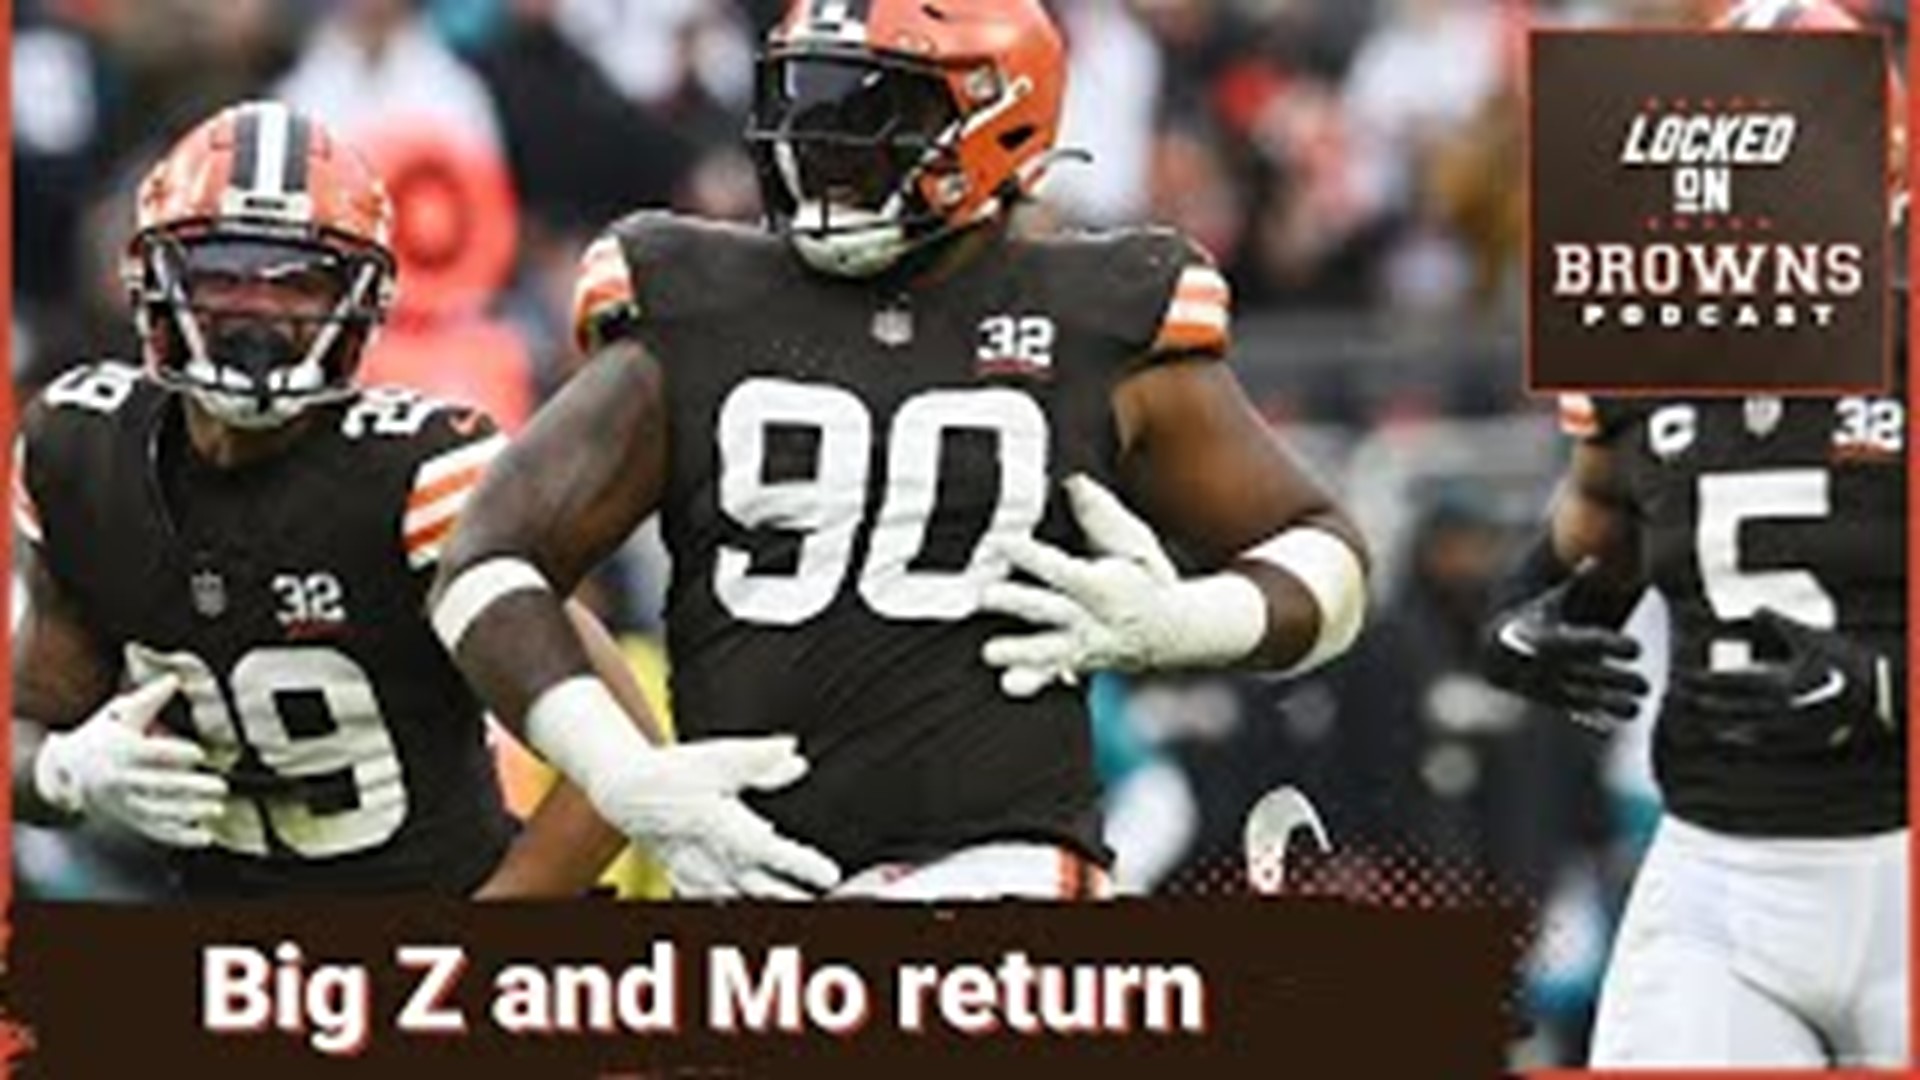 Host Jeff Lloyd is joined by the OBR's Pete Smith to break down some of the major moves of day one of NFL free agency.
It was a slow start for the Cleveland Browns,